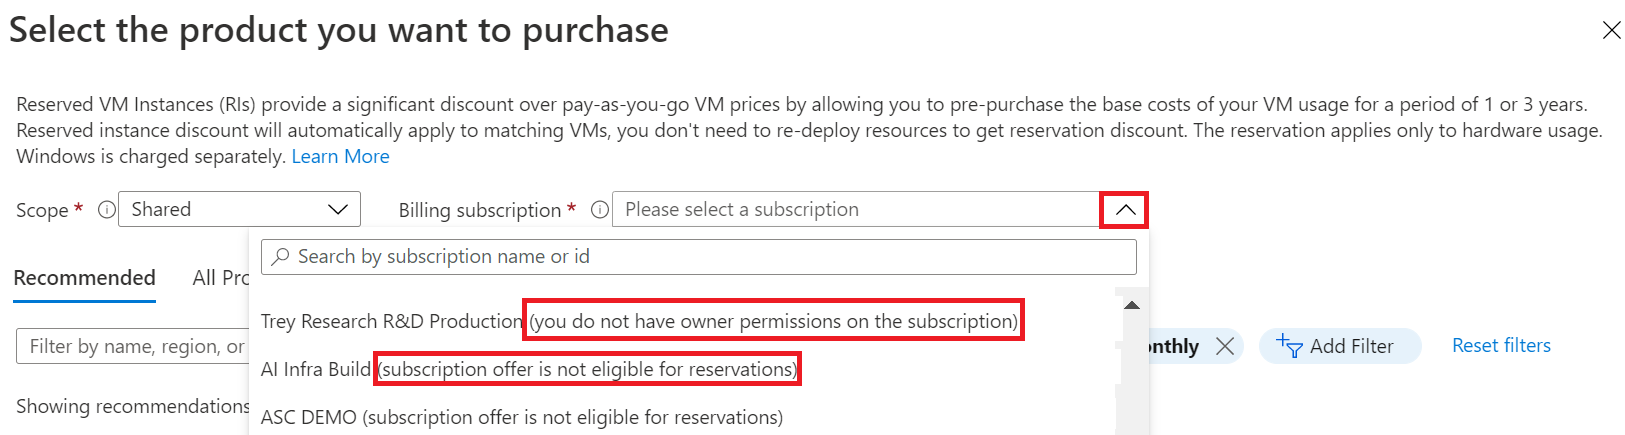 microsoft office purchase no subscription